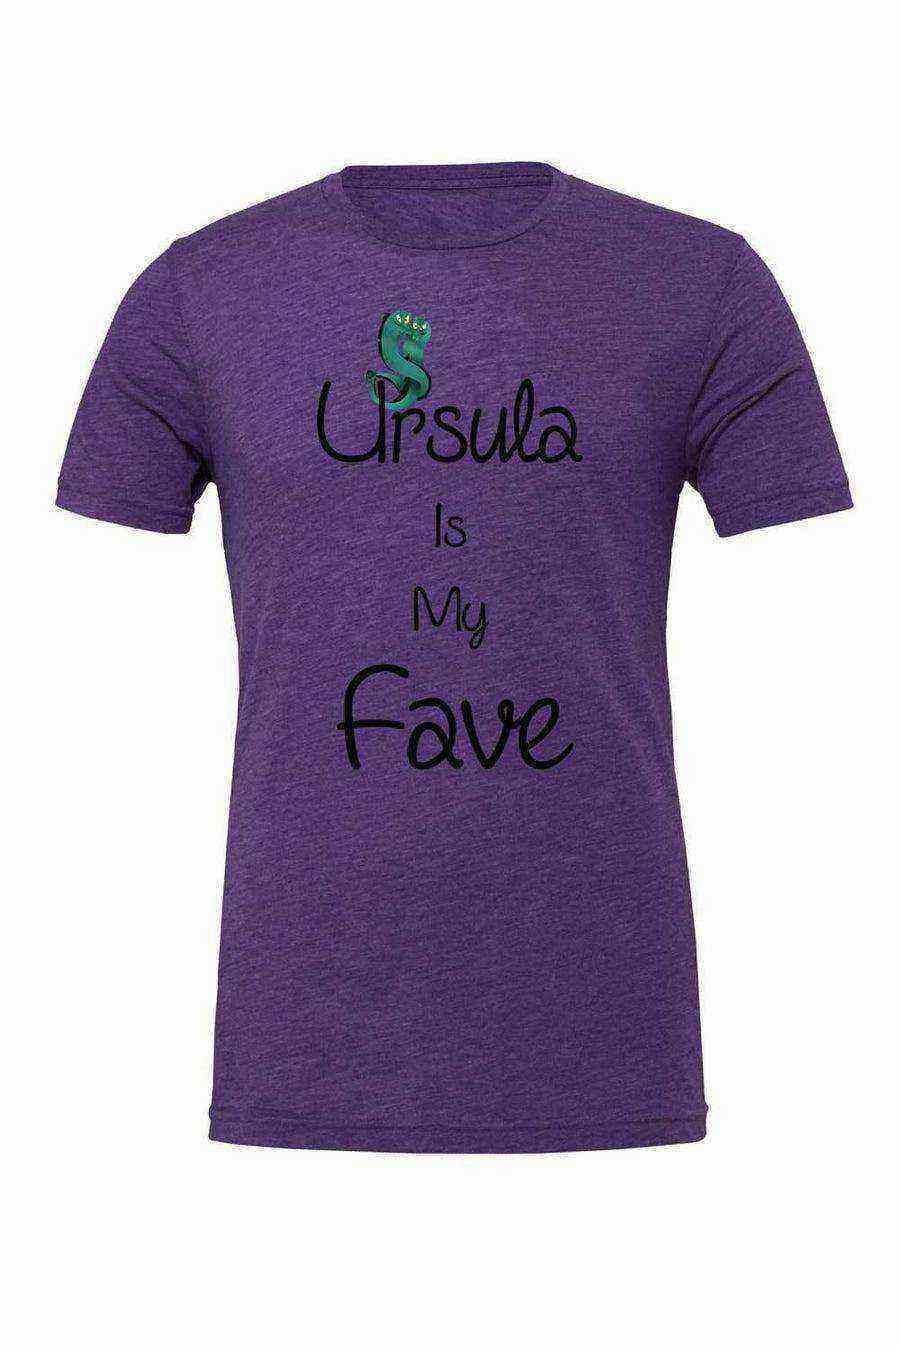 Youth | Ursula is my Fave Shirt - Dylan's Tees